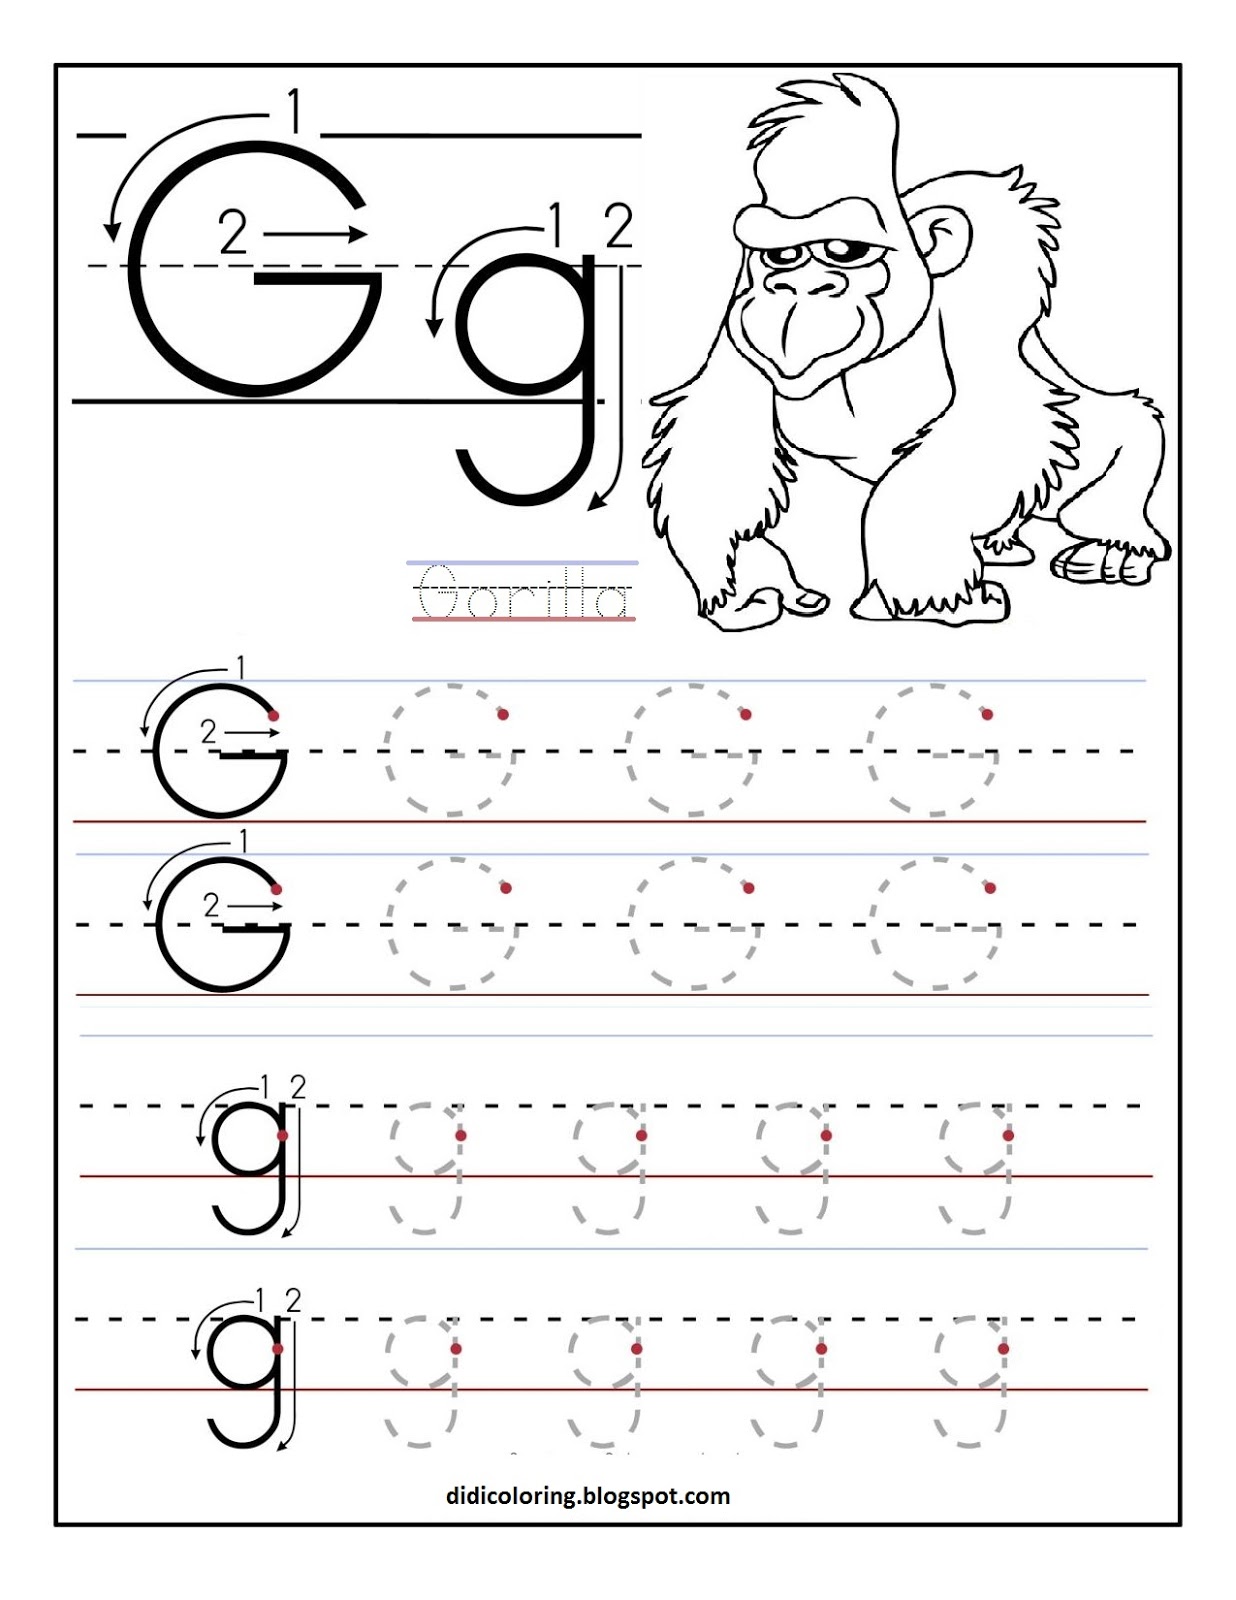 Free printable worksheet letter G for your child to learn and write dania rehman Kids Coloring Pages